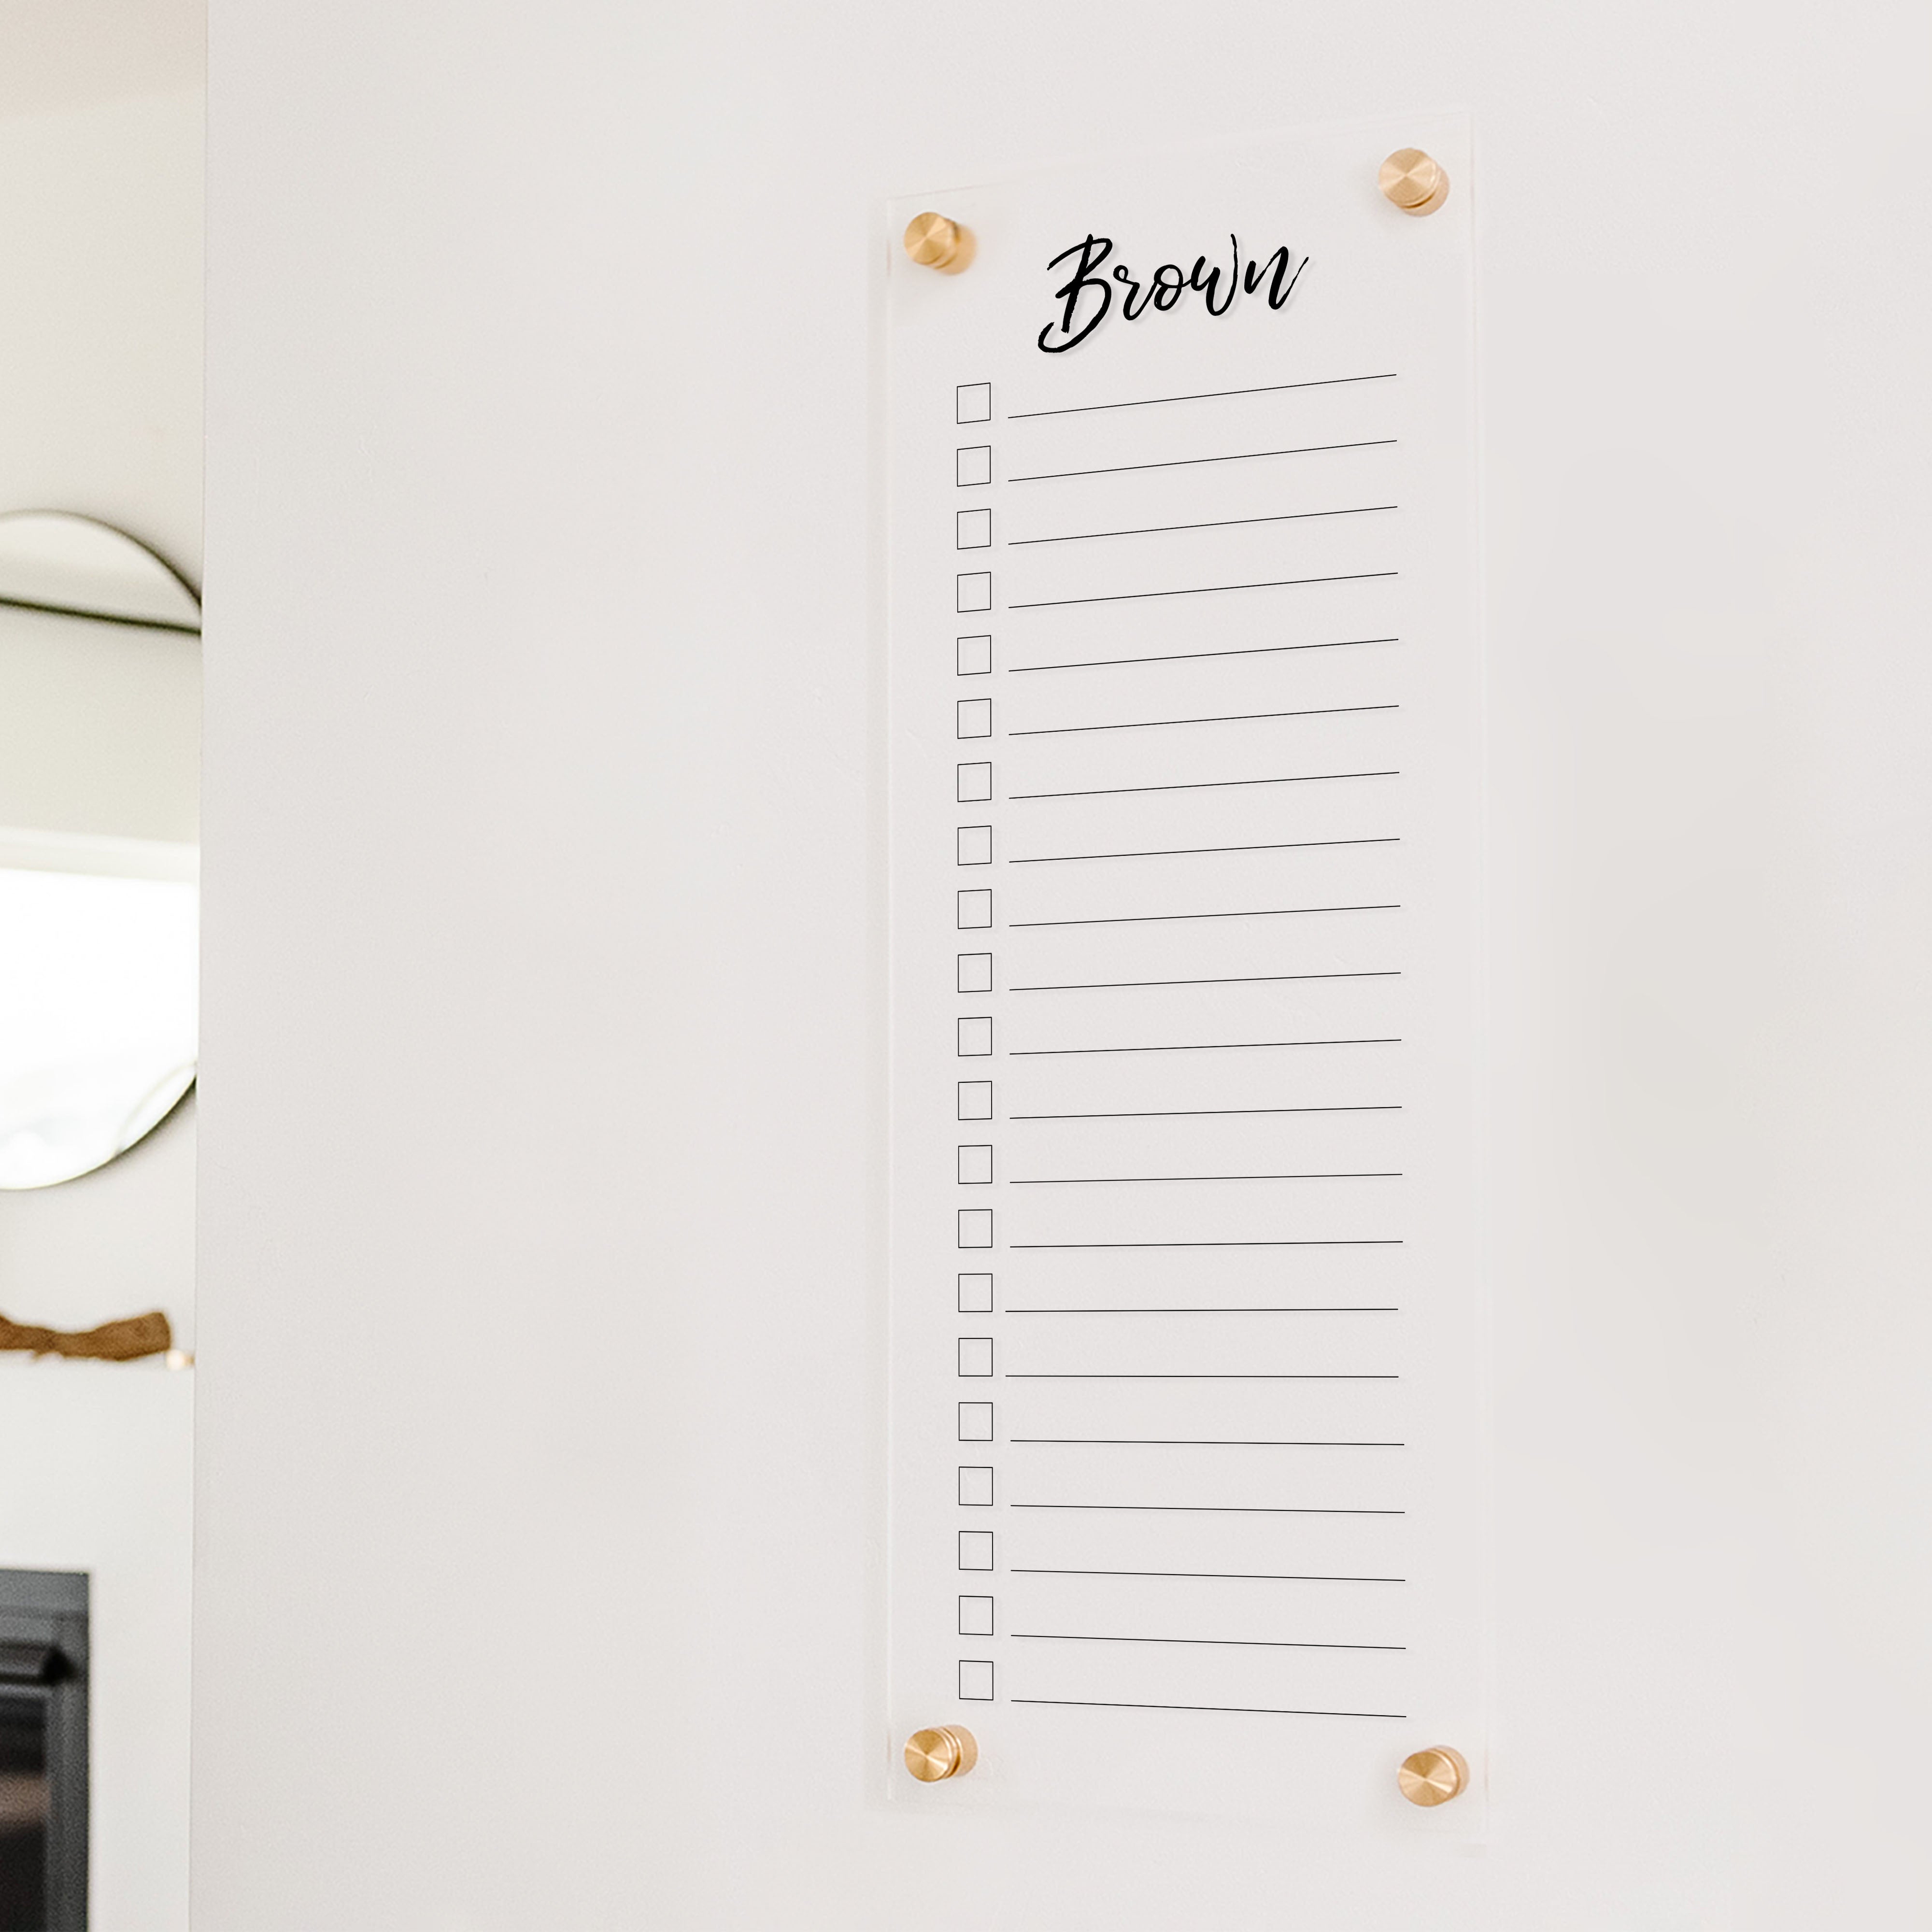 A dry-erase to do list made of acrylic hanging on the wall